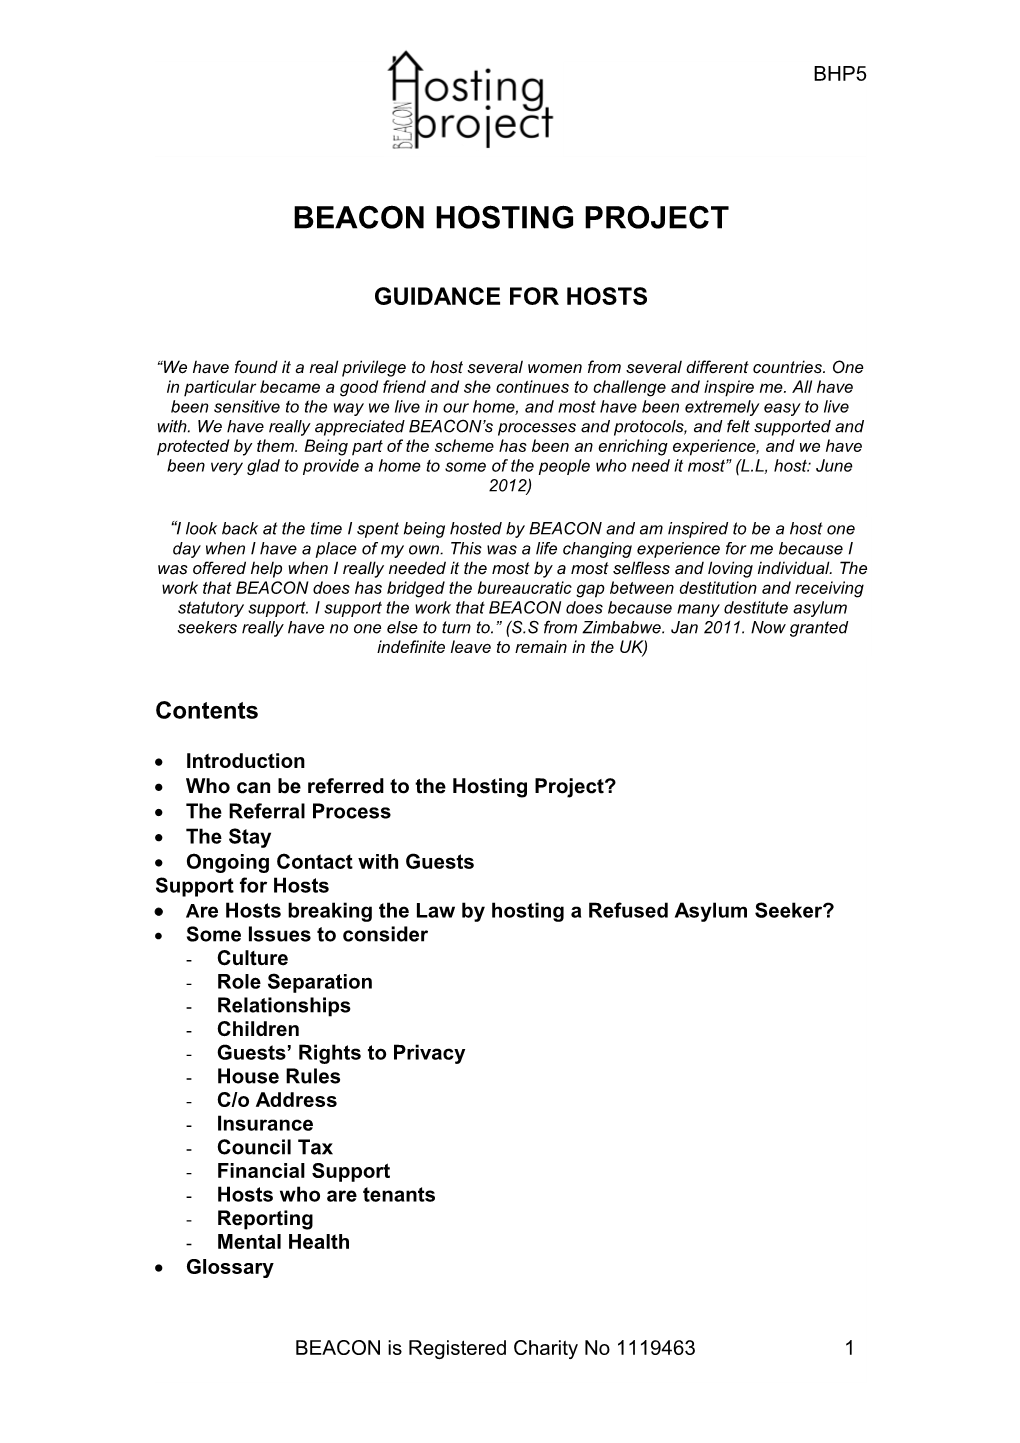 Beacon Hosting Project